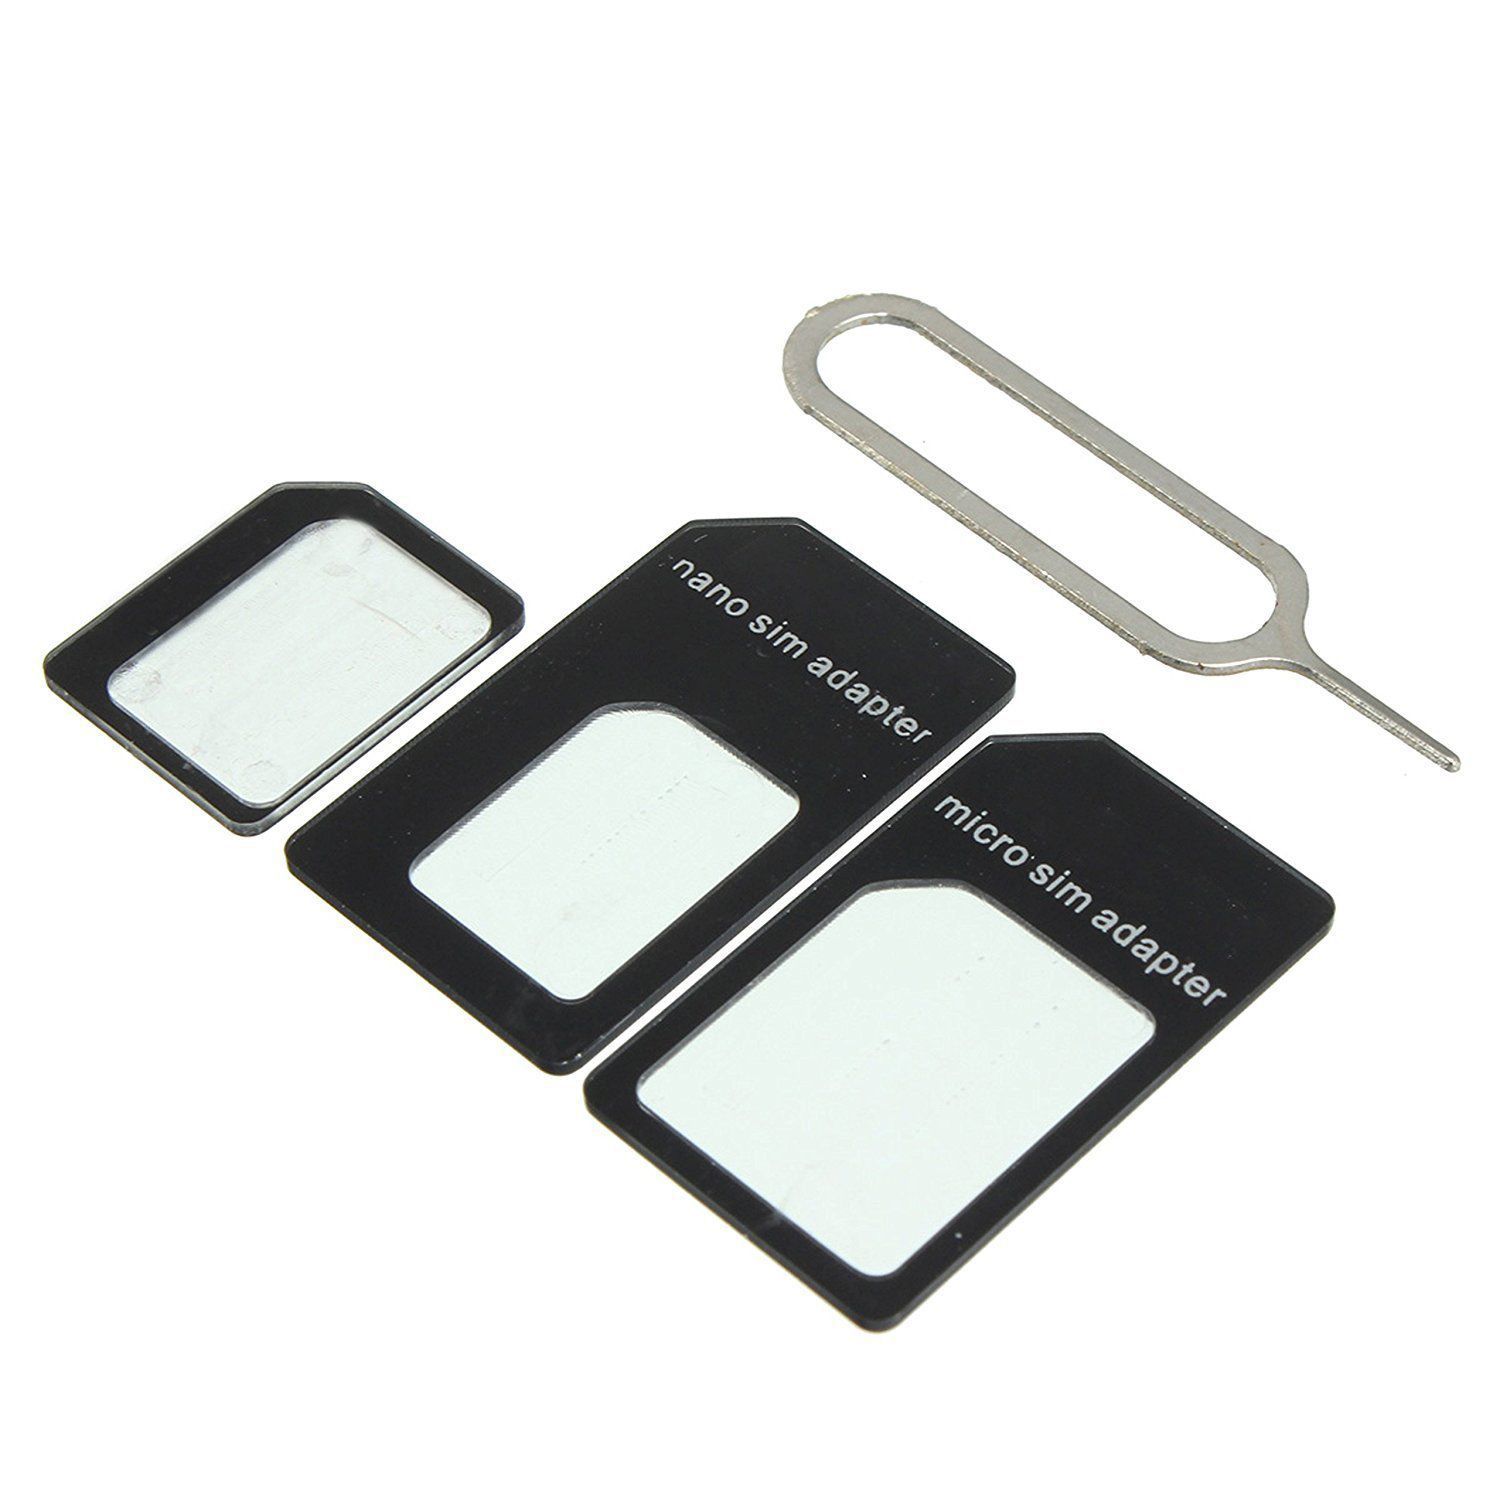 3 In 1 Sim Adapter With Sim Ejector Tool For All Mobile Devices